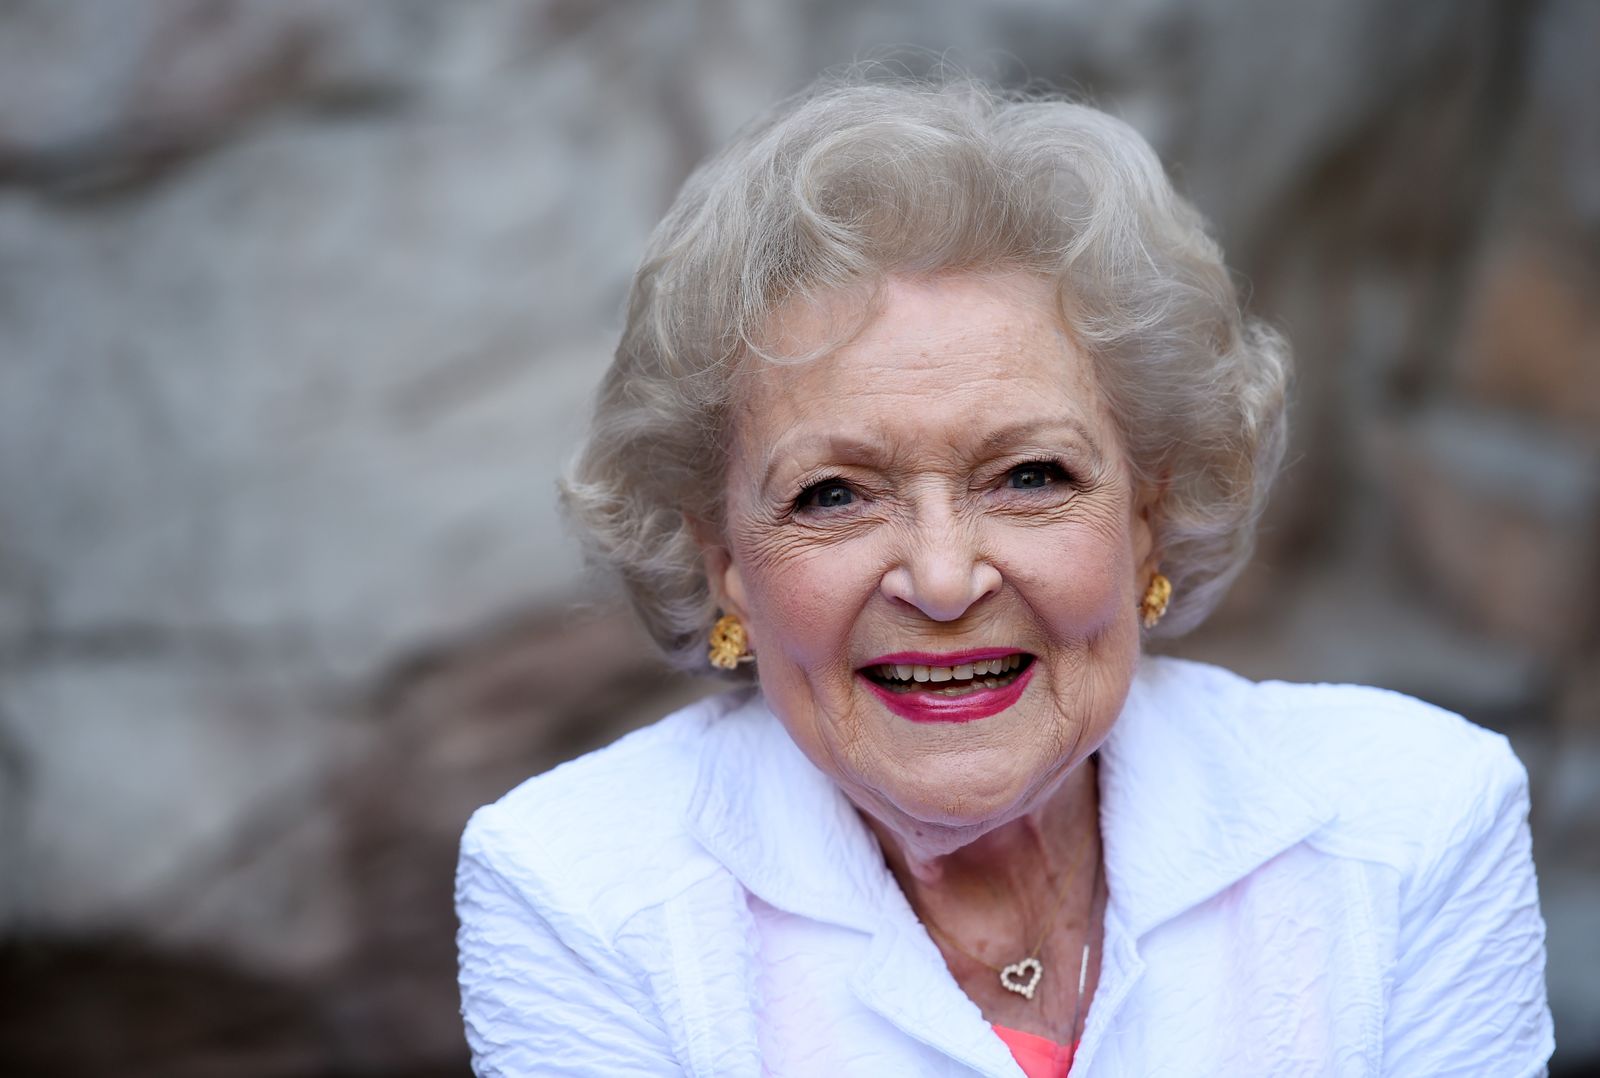 How Betty White Broke Barriers for Women in Television | Smart News Arts & Culture